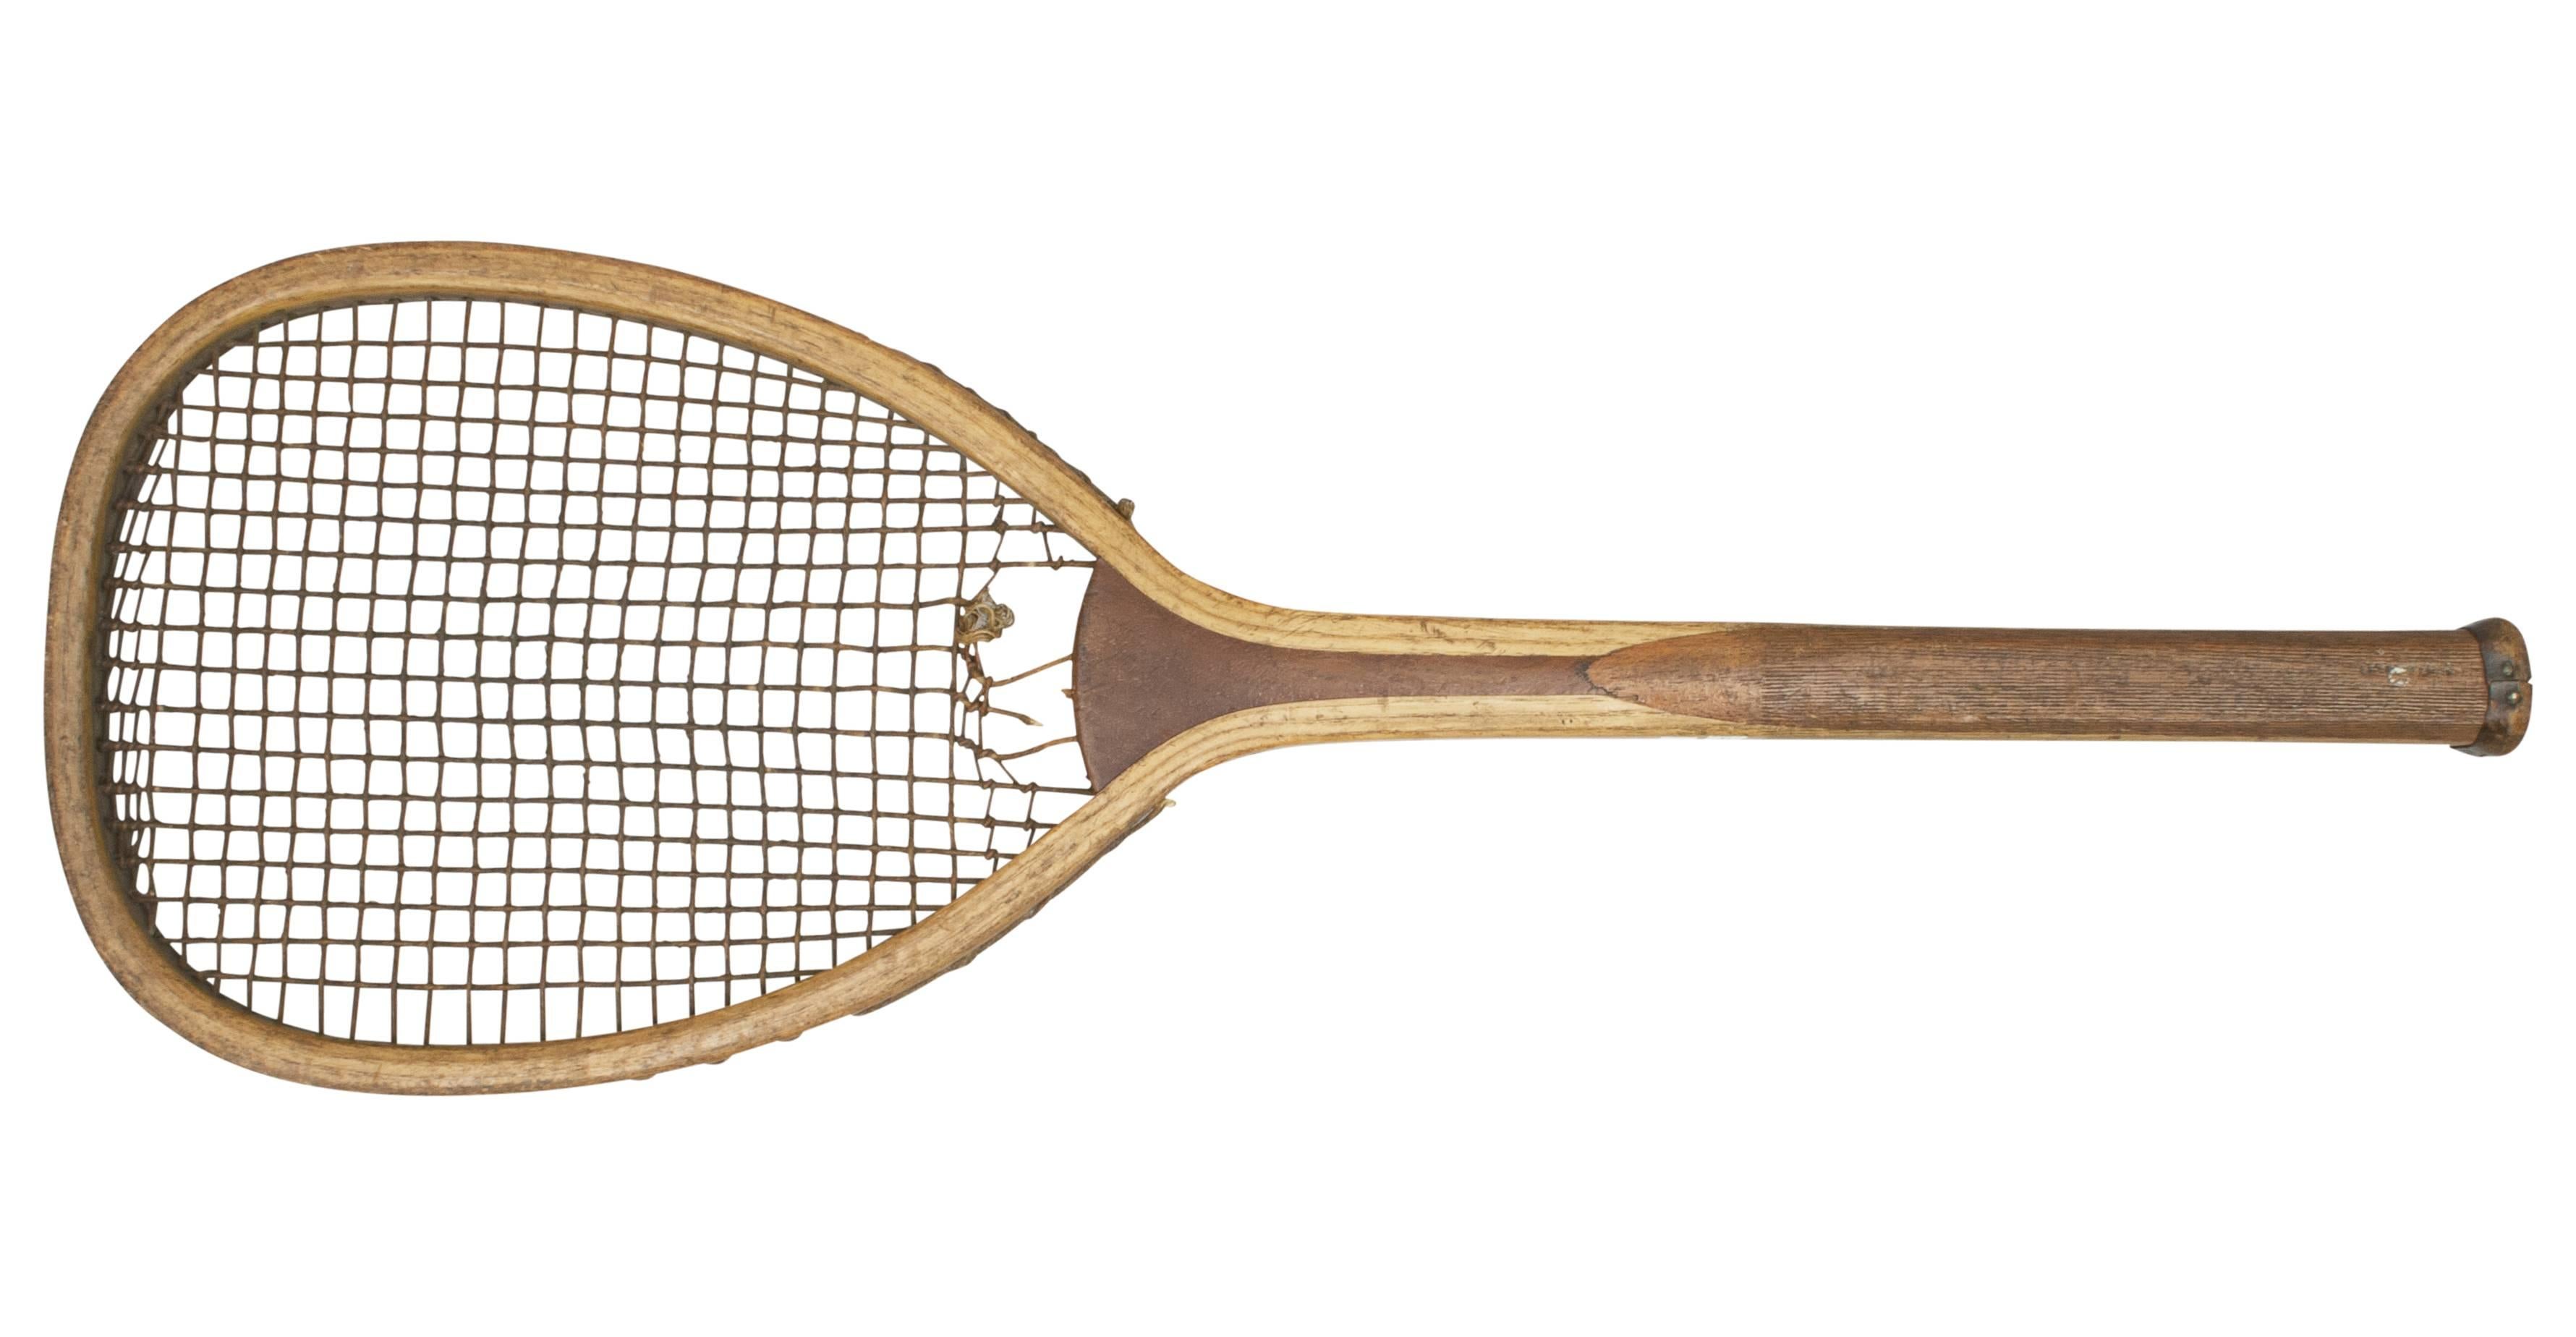 F.H Ayres lawn tennis racket.
A fine example of a flat top lawn tennis racket by F.H. Ayres. The racket has an ash frame with faint Ayres name, convex walnut wedge and with original thick gut stringing. The stringing is slightly damaged but all